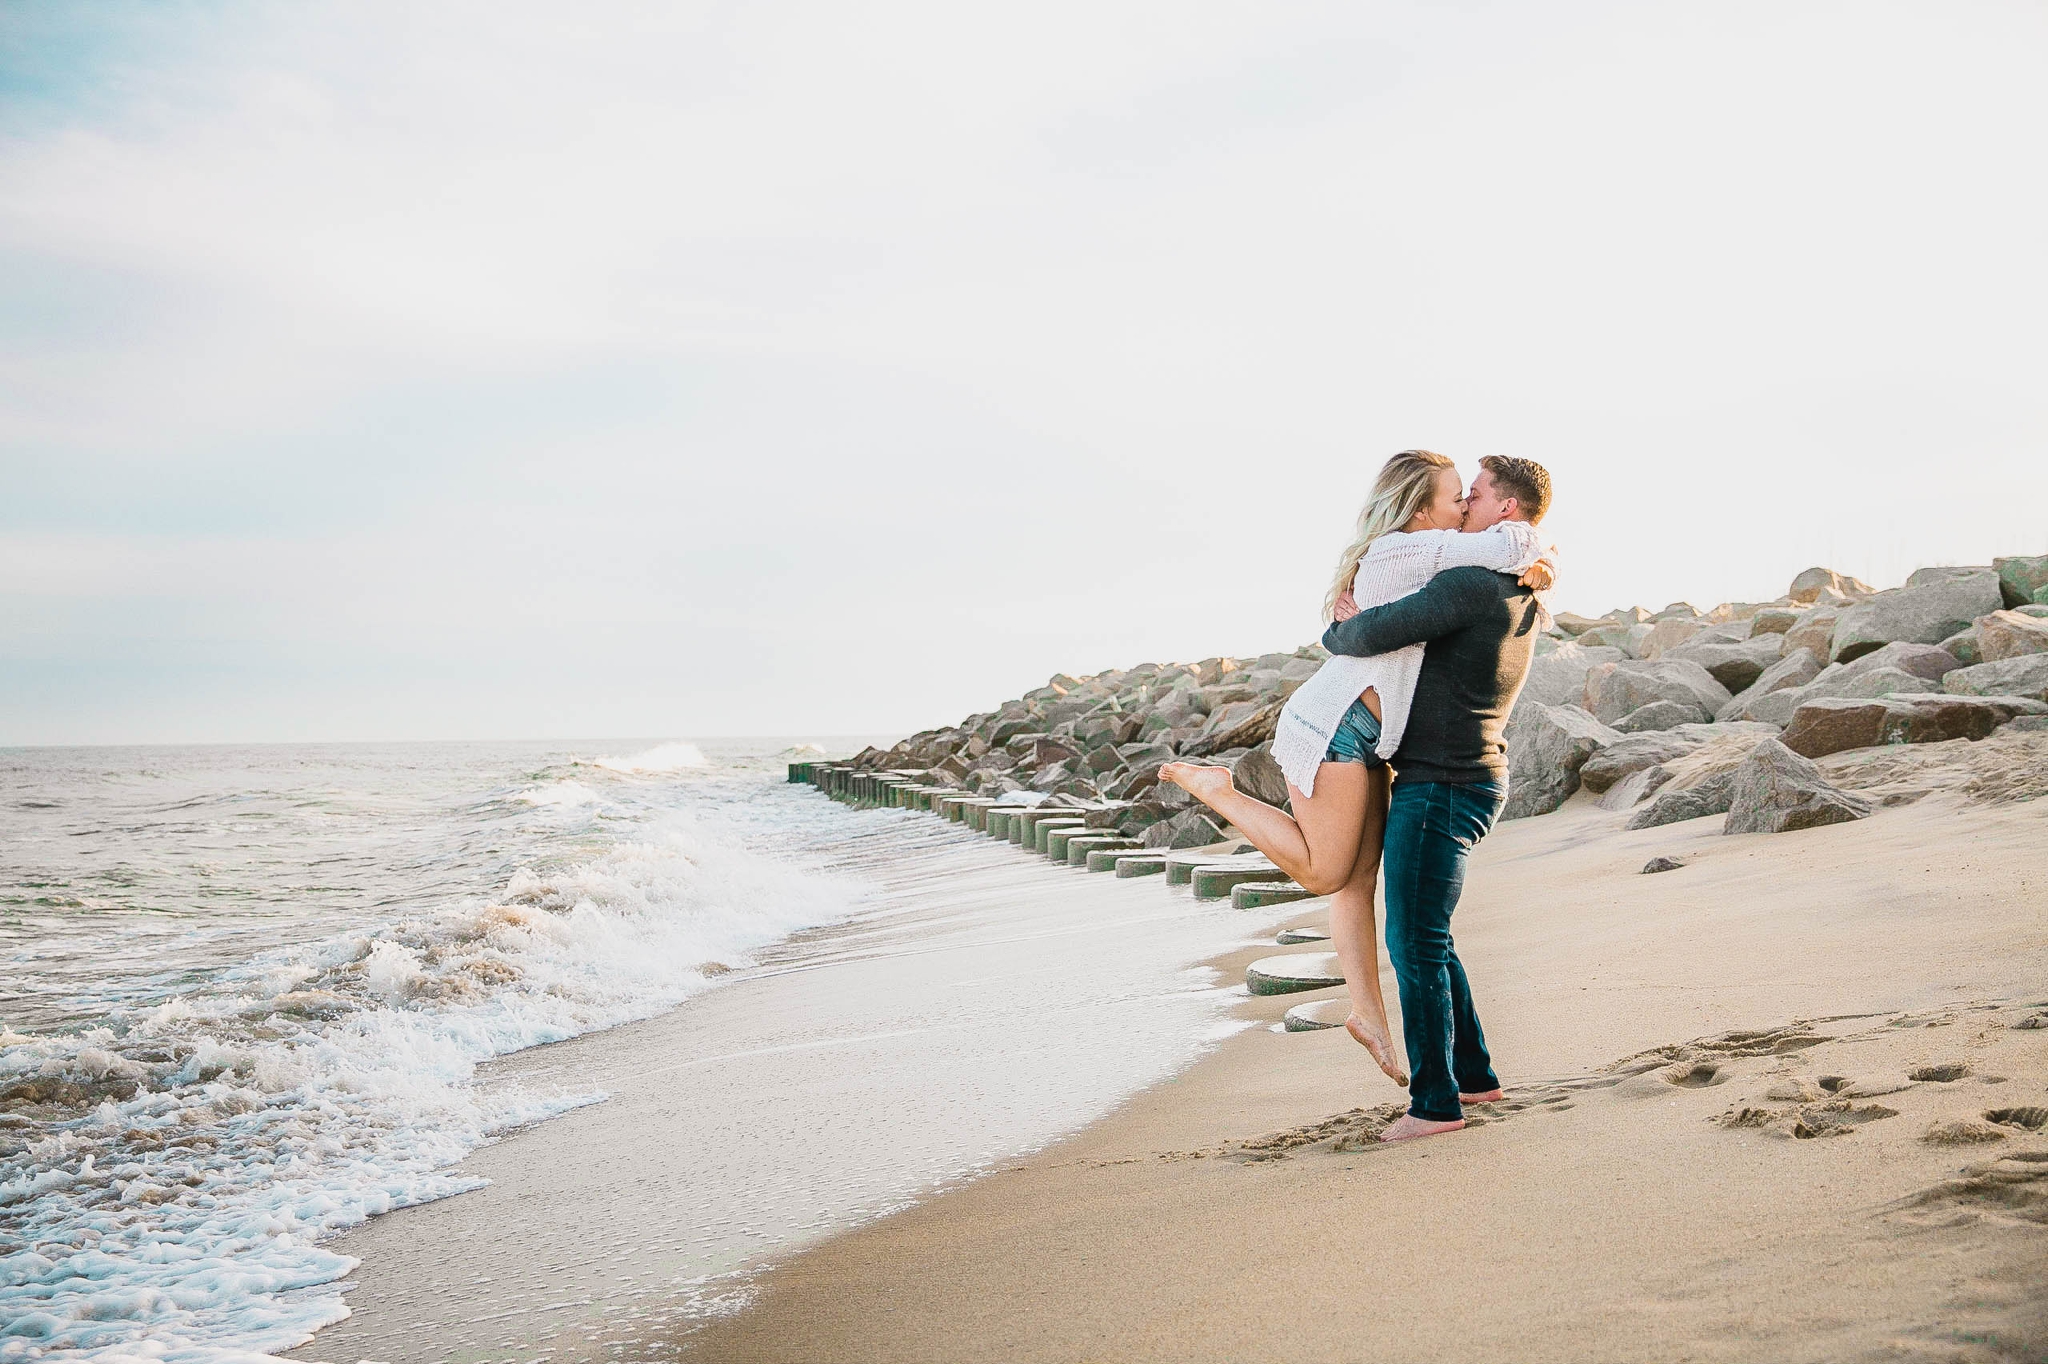  guy picking up his fiance on the beach for a kiss - girl wearing ripped jeans shorts and a white free people sweater - Casual Beach Engagement Photography Session - Honolulu Oahu Hawaii Wedding Photographer - Johanna Dye 